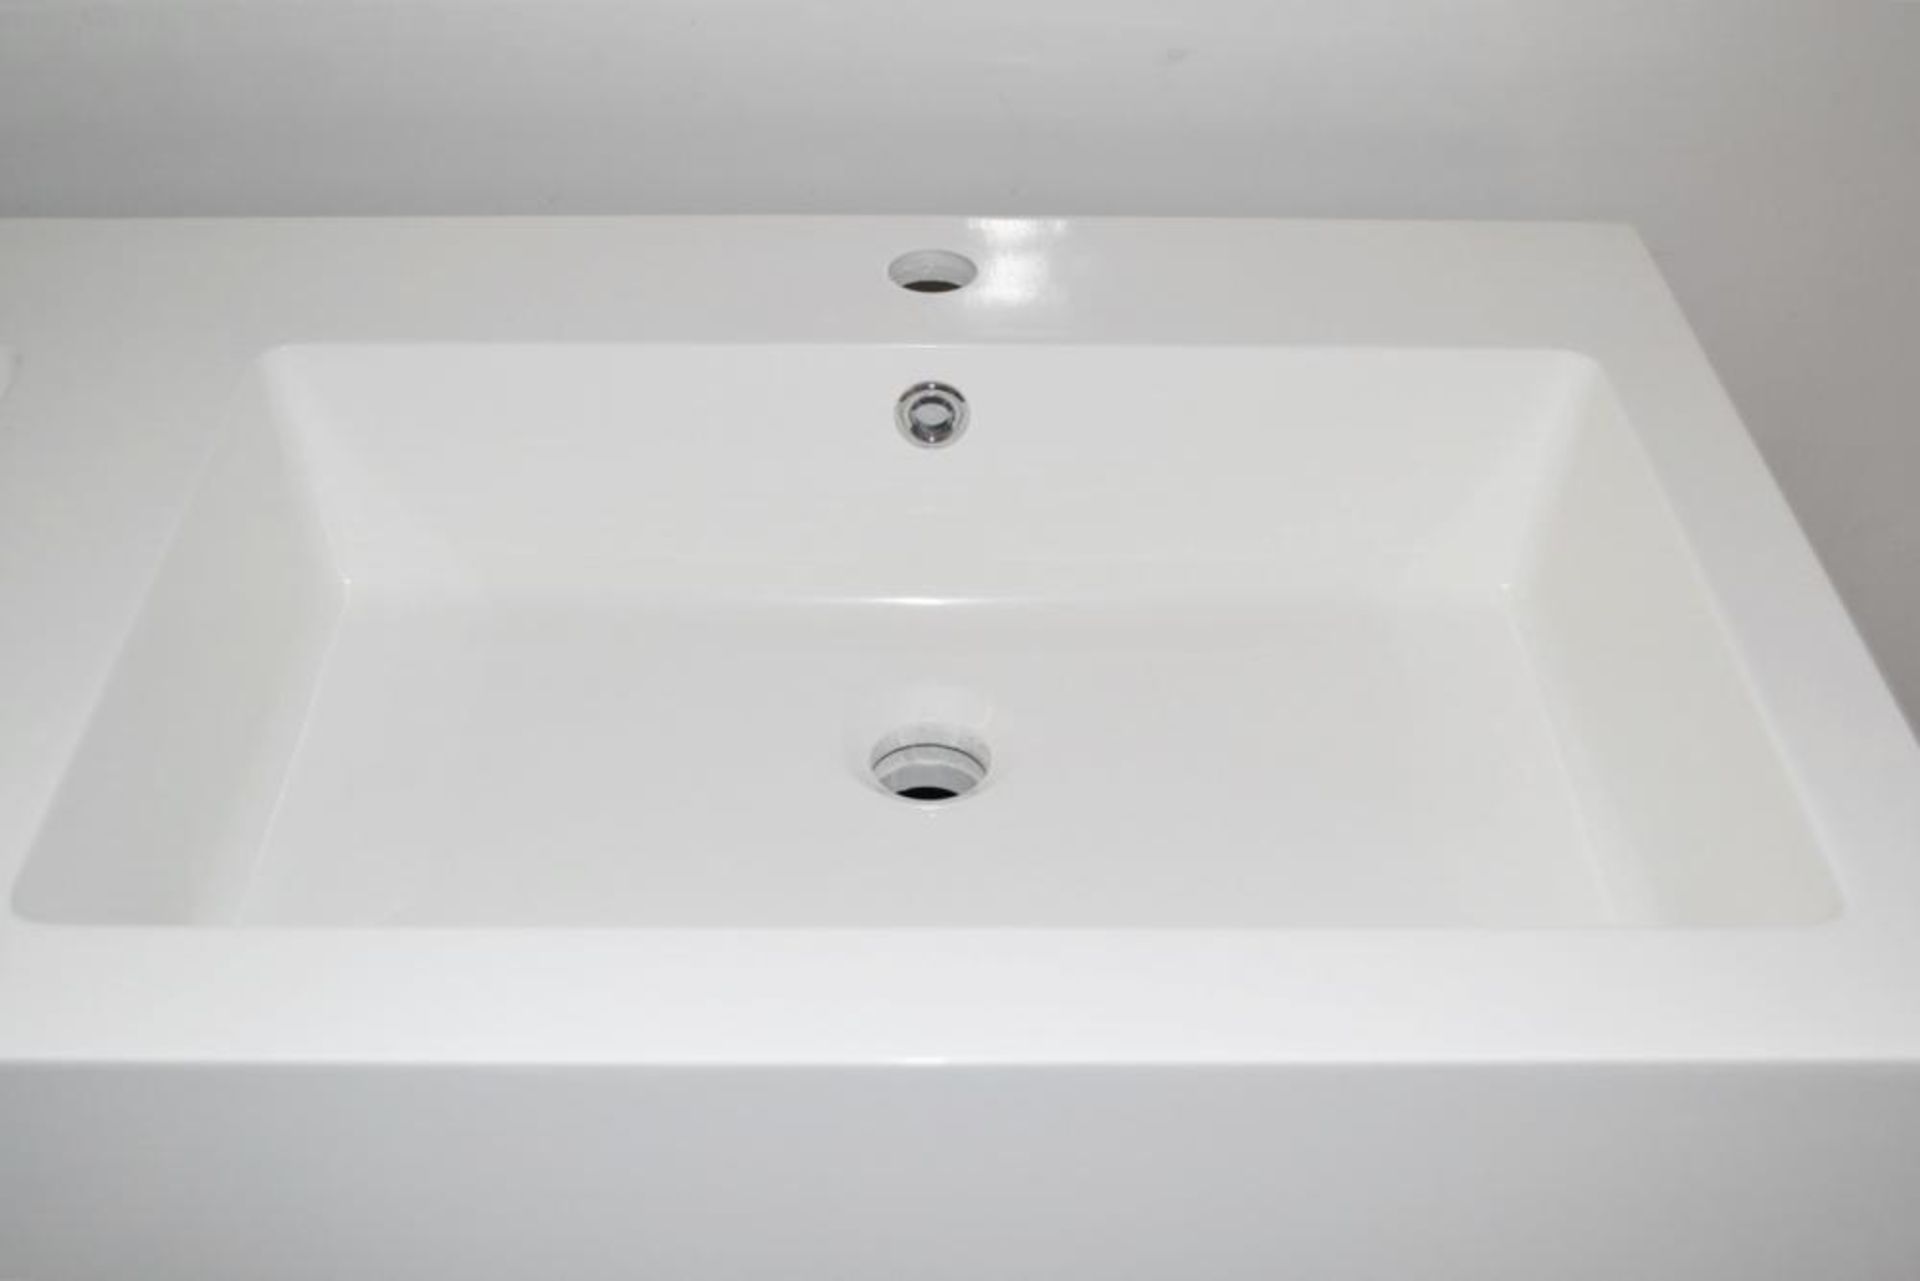 1 x His & Hers Double Bathroom Vanity Unit - 1200mm Wide - Features a High Gloss White Finish and - Image 5 of 7